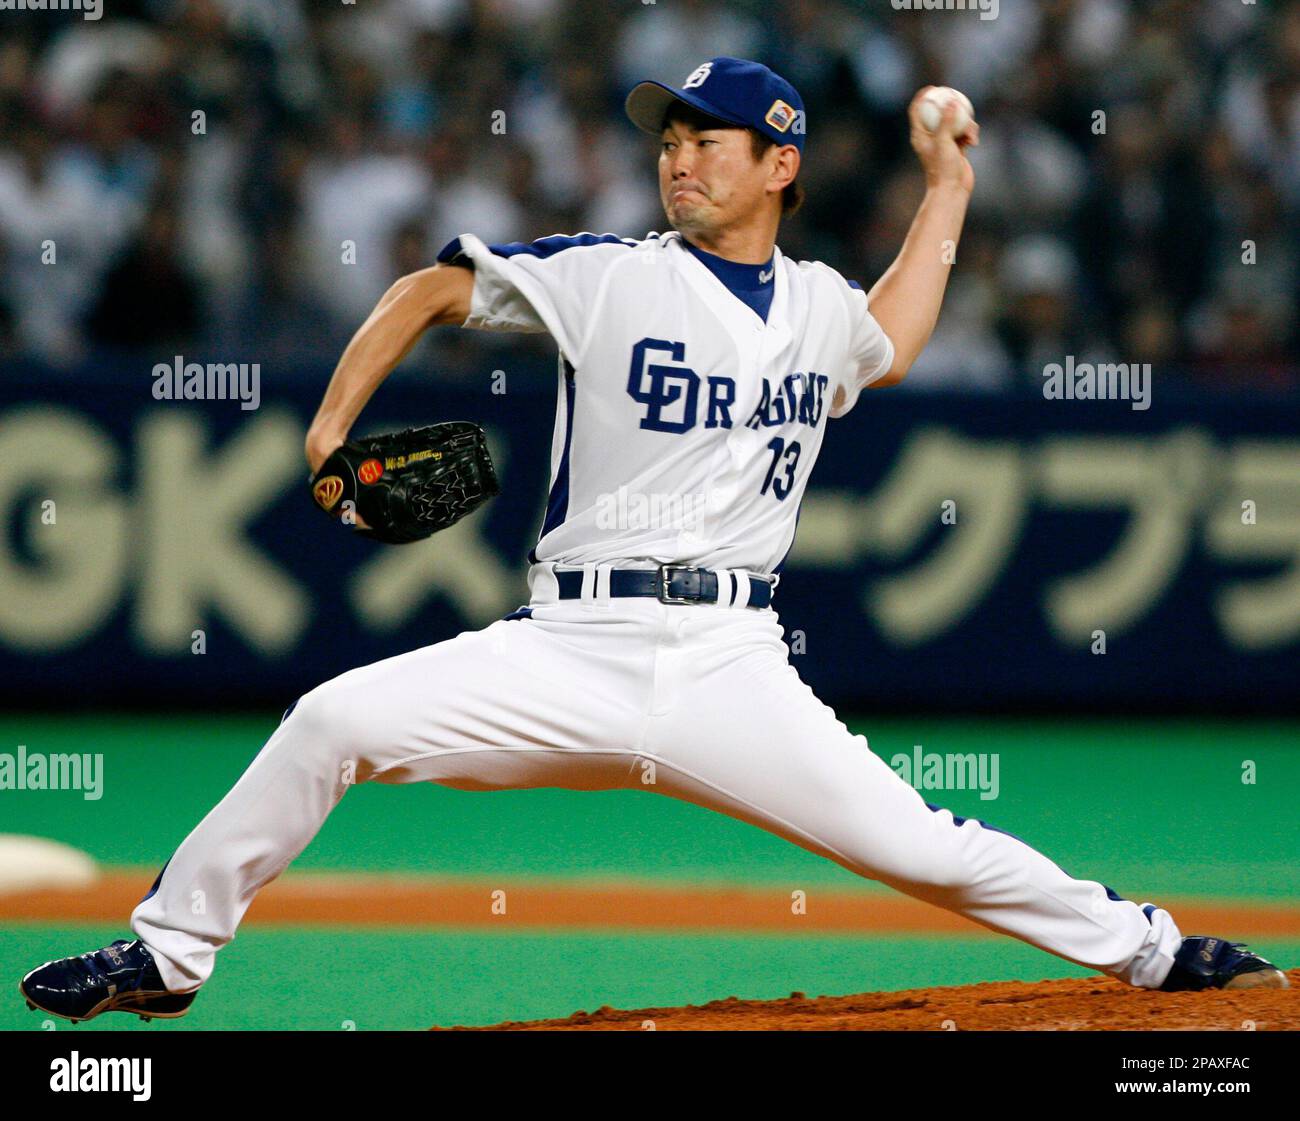 Chunichi Dragons closer Hitoki Iwase pitches against the Nippon Ham Fighters in the ninth inning of Game 5 at the Japan Series baseball at Nagoya Dome in Nagoya, central Japan, Thursday, Nov.